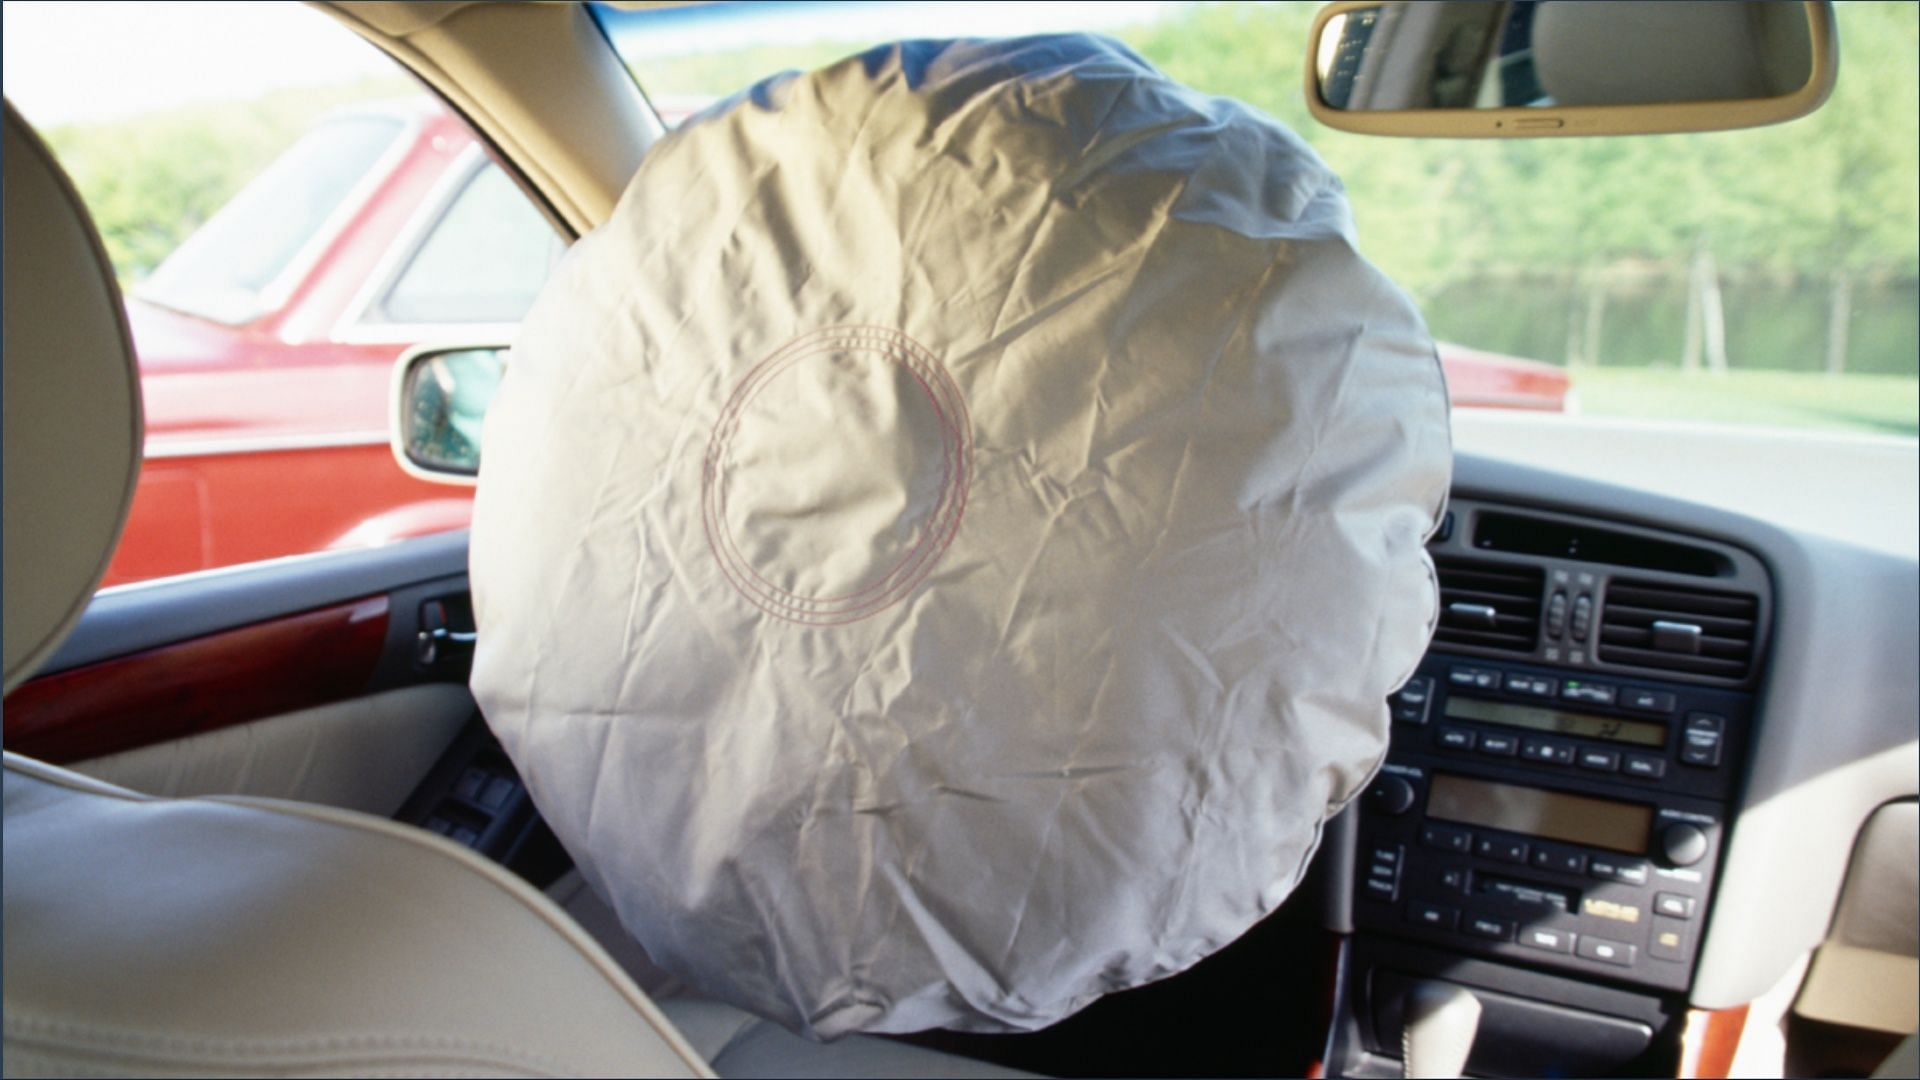 NHTSA takes coercive action against ARC to force Airbag recall for over 52 million airbag inflators in the United States (Image via Patti Mcconville / Getty Images)